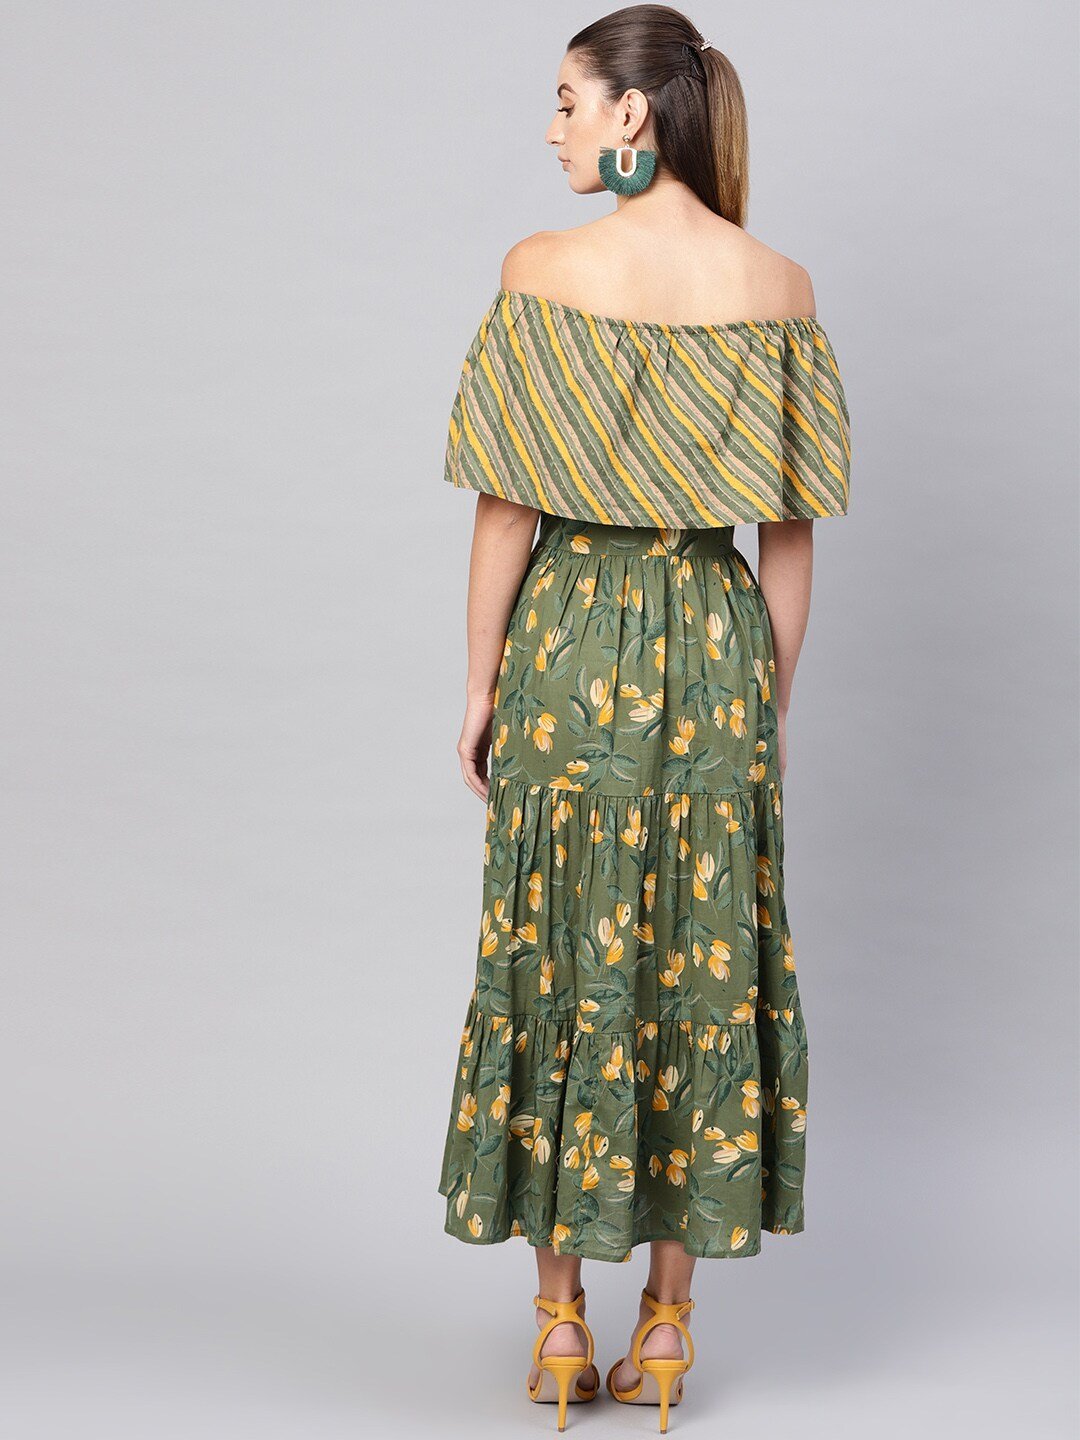 Women's  Olive Green & Mustard Yellow Floral Printed Maxi Off-Shoulder Tiered Dress - AKS